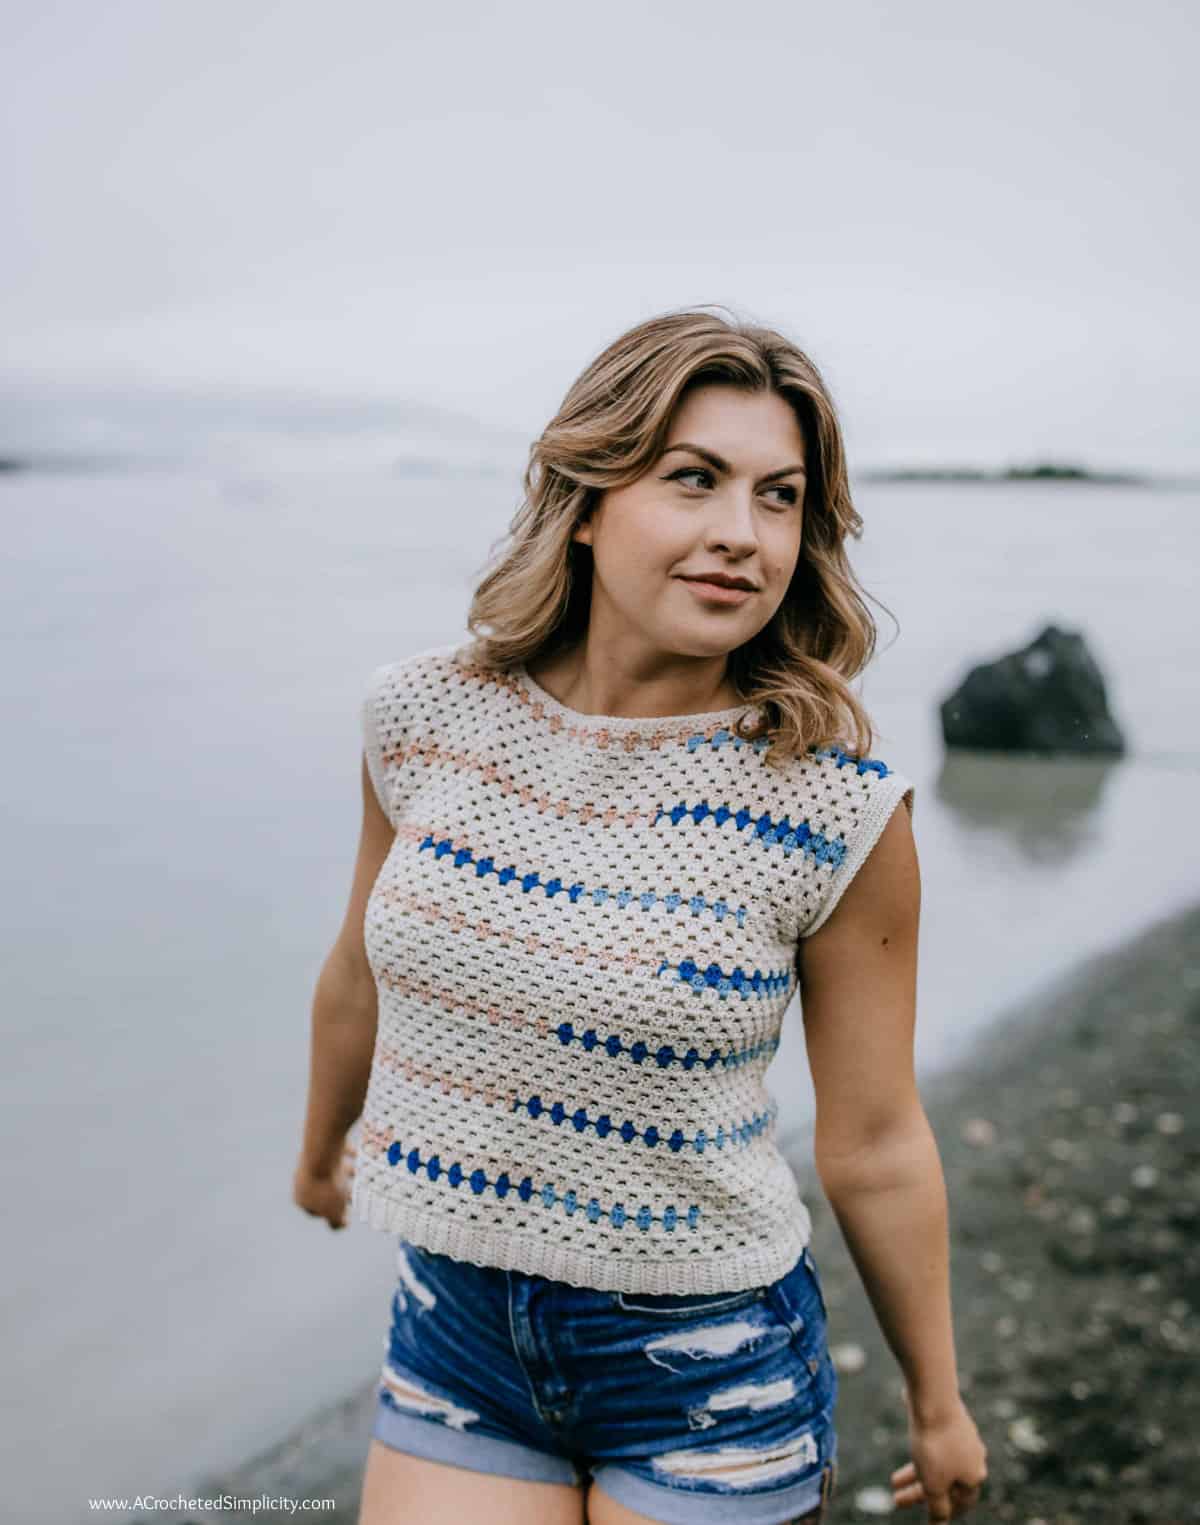 Woman on a beach modeling a vintage inspired crochet top pattern.